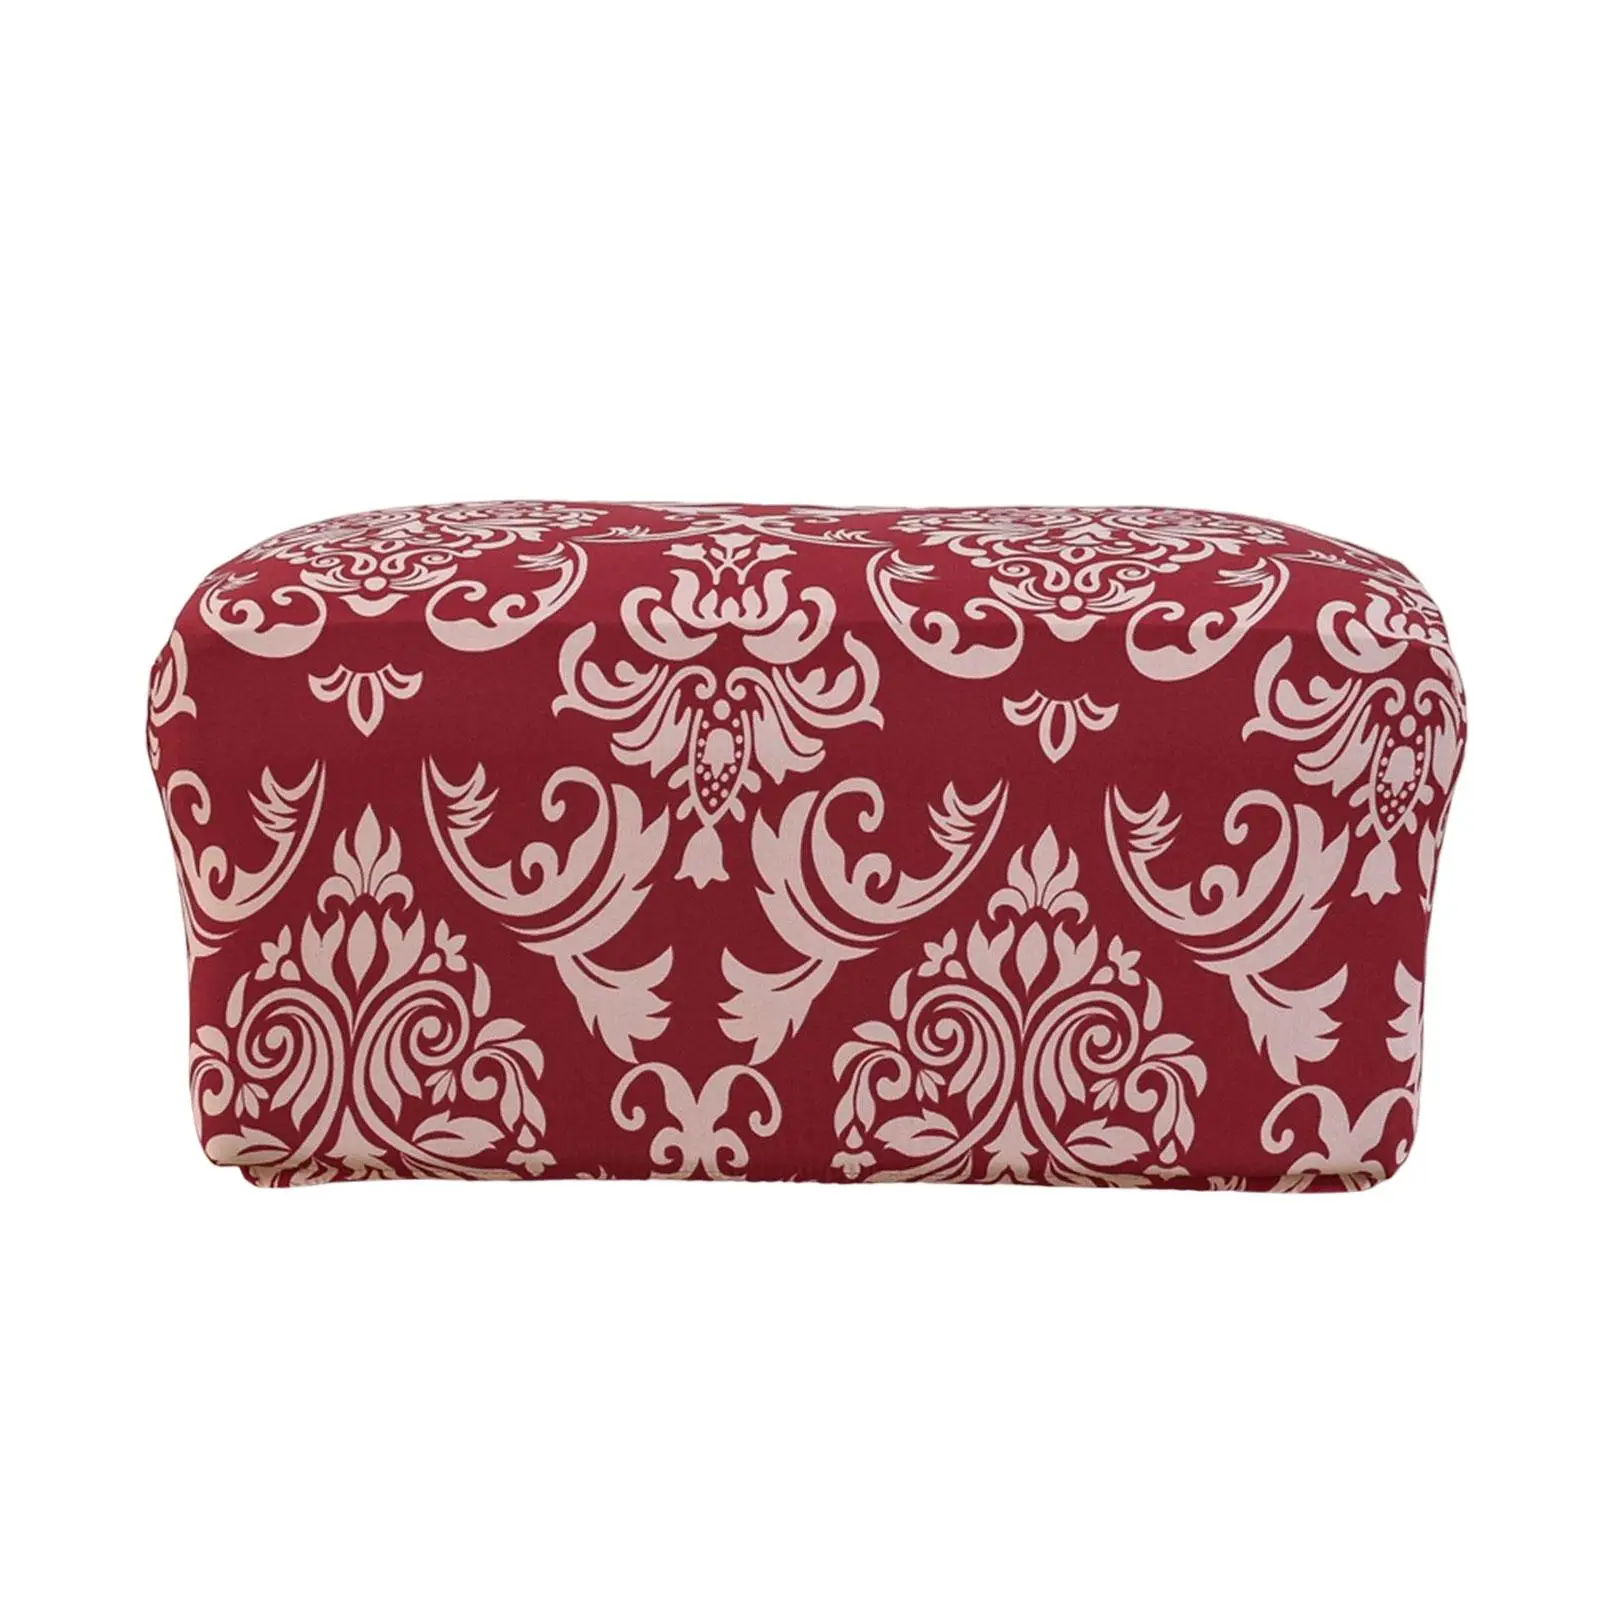 Stretch Ottoman Covers Printed Protector Cover Nonslip Modern Living Room